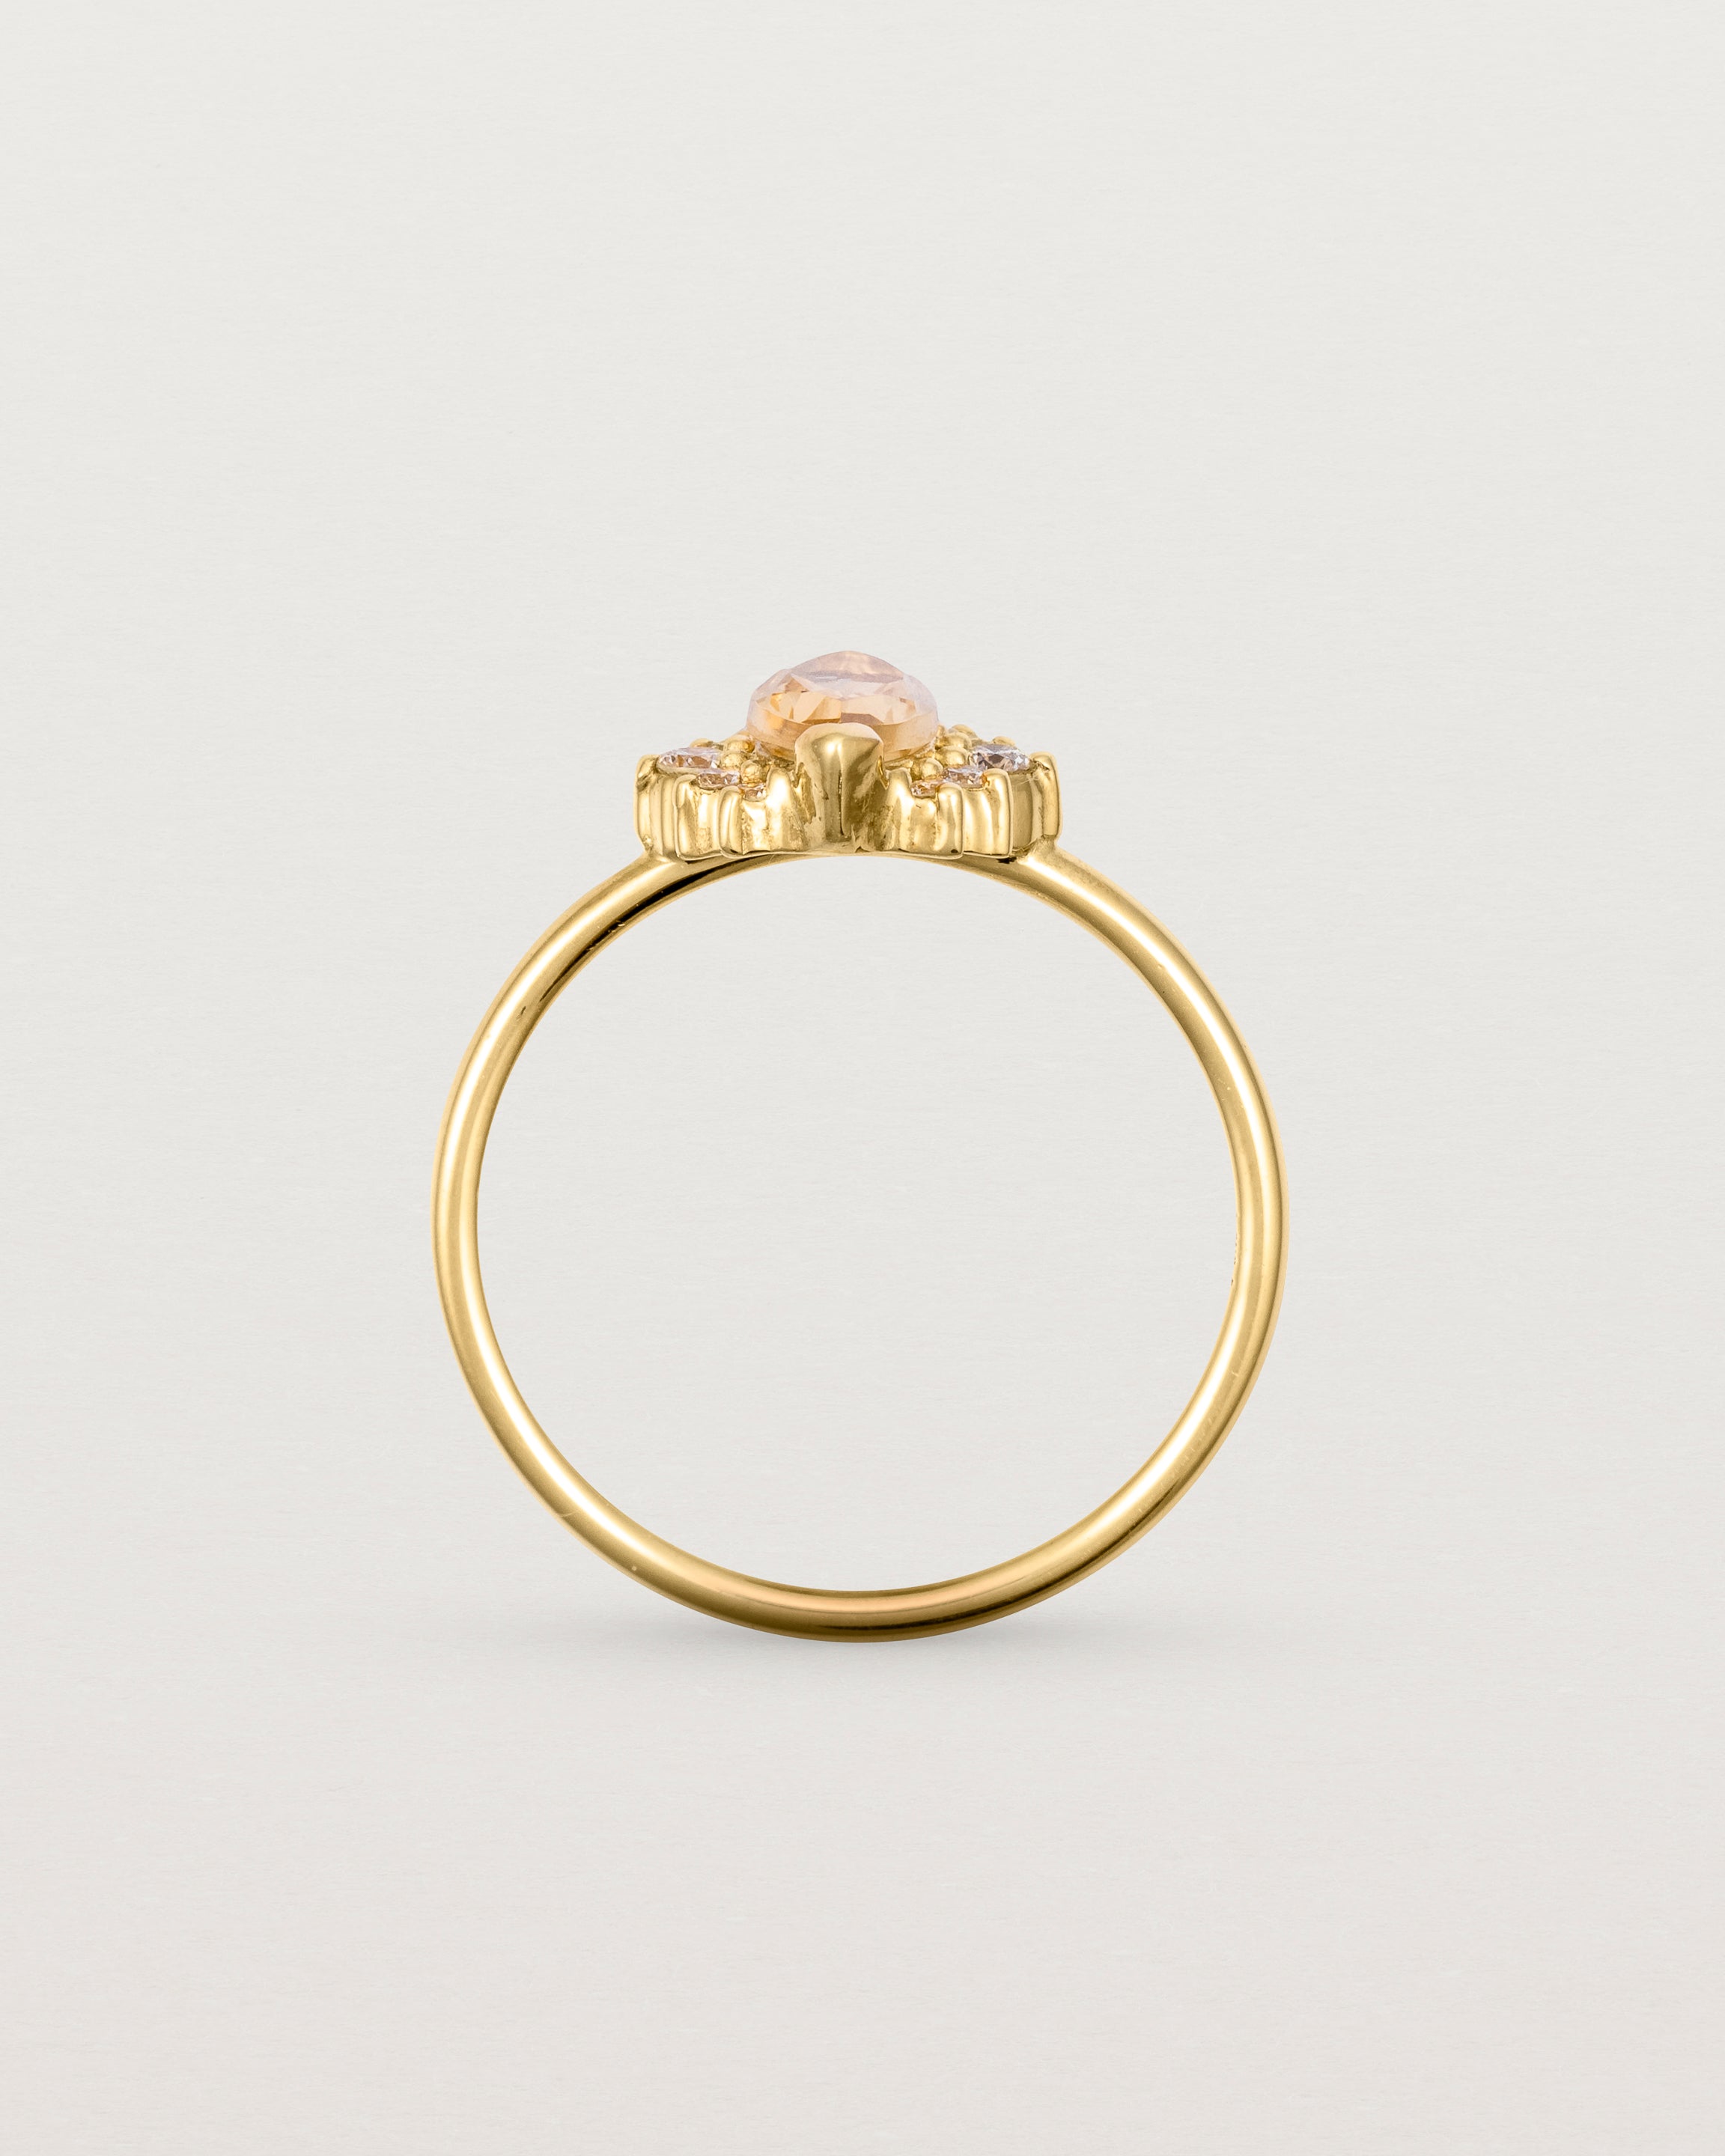 A yellow gold ring featuring a marquise champagne quartz with a halo of white diamonds